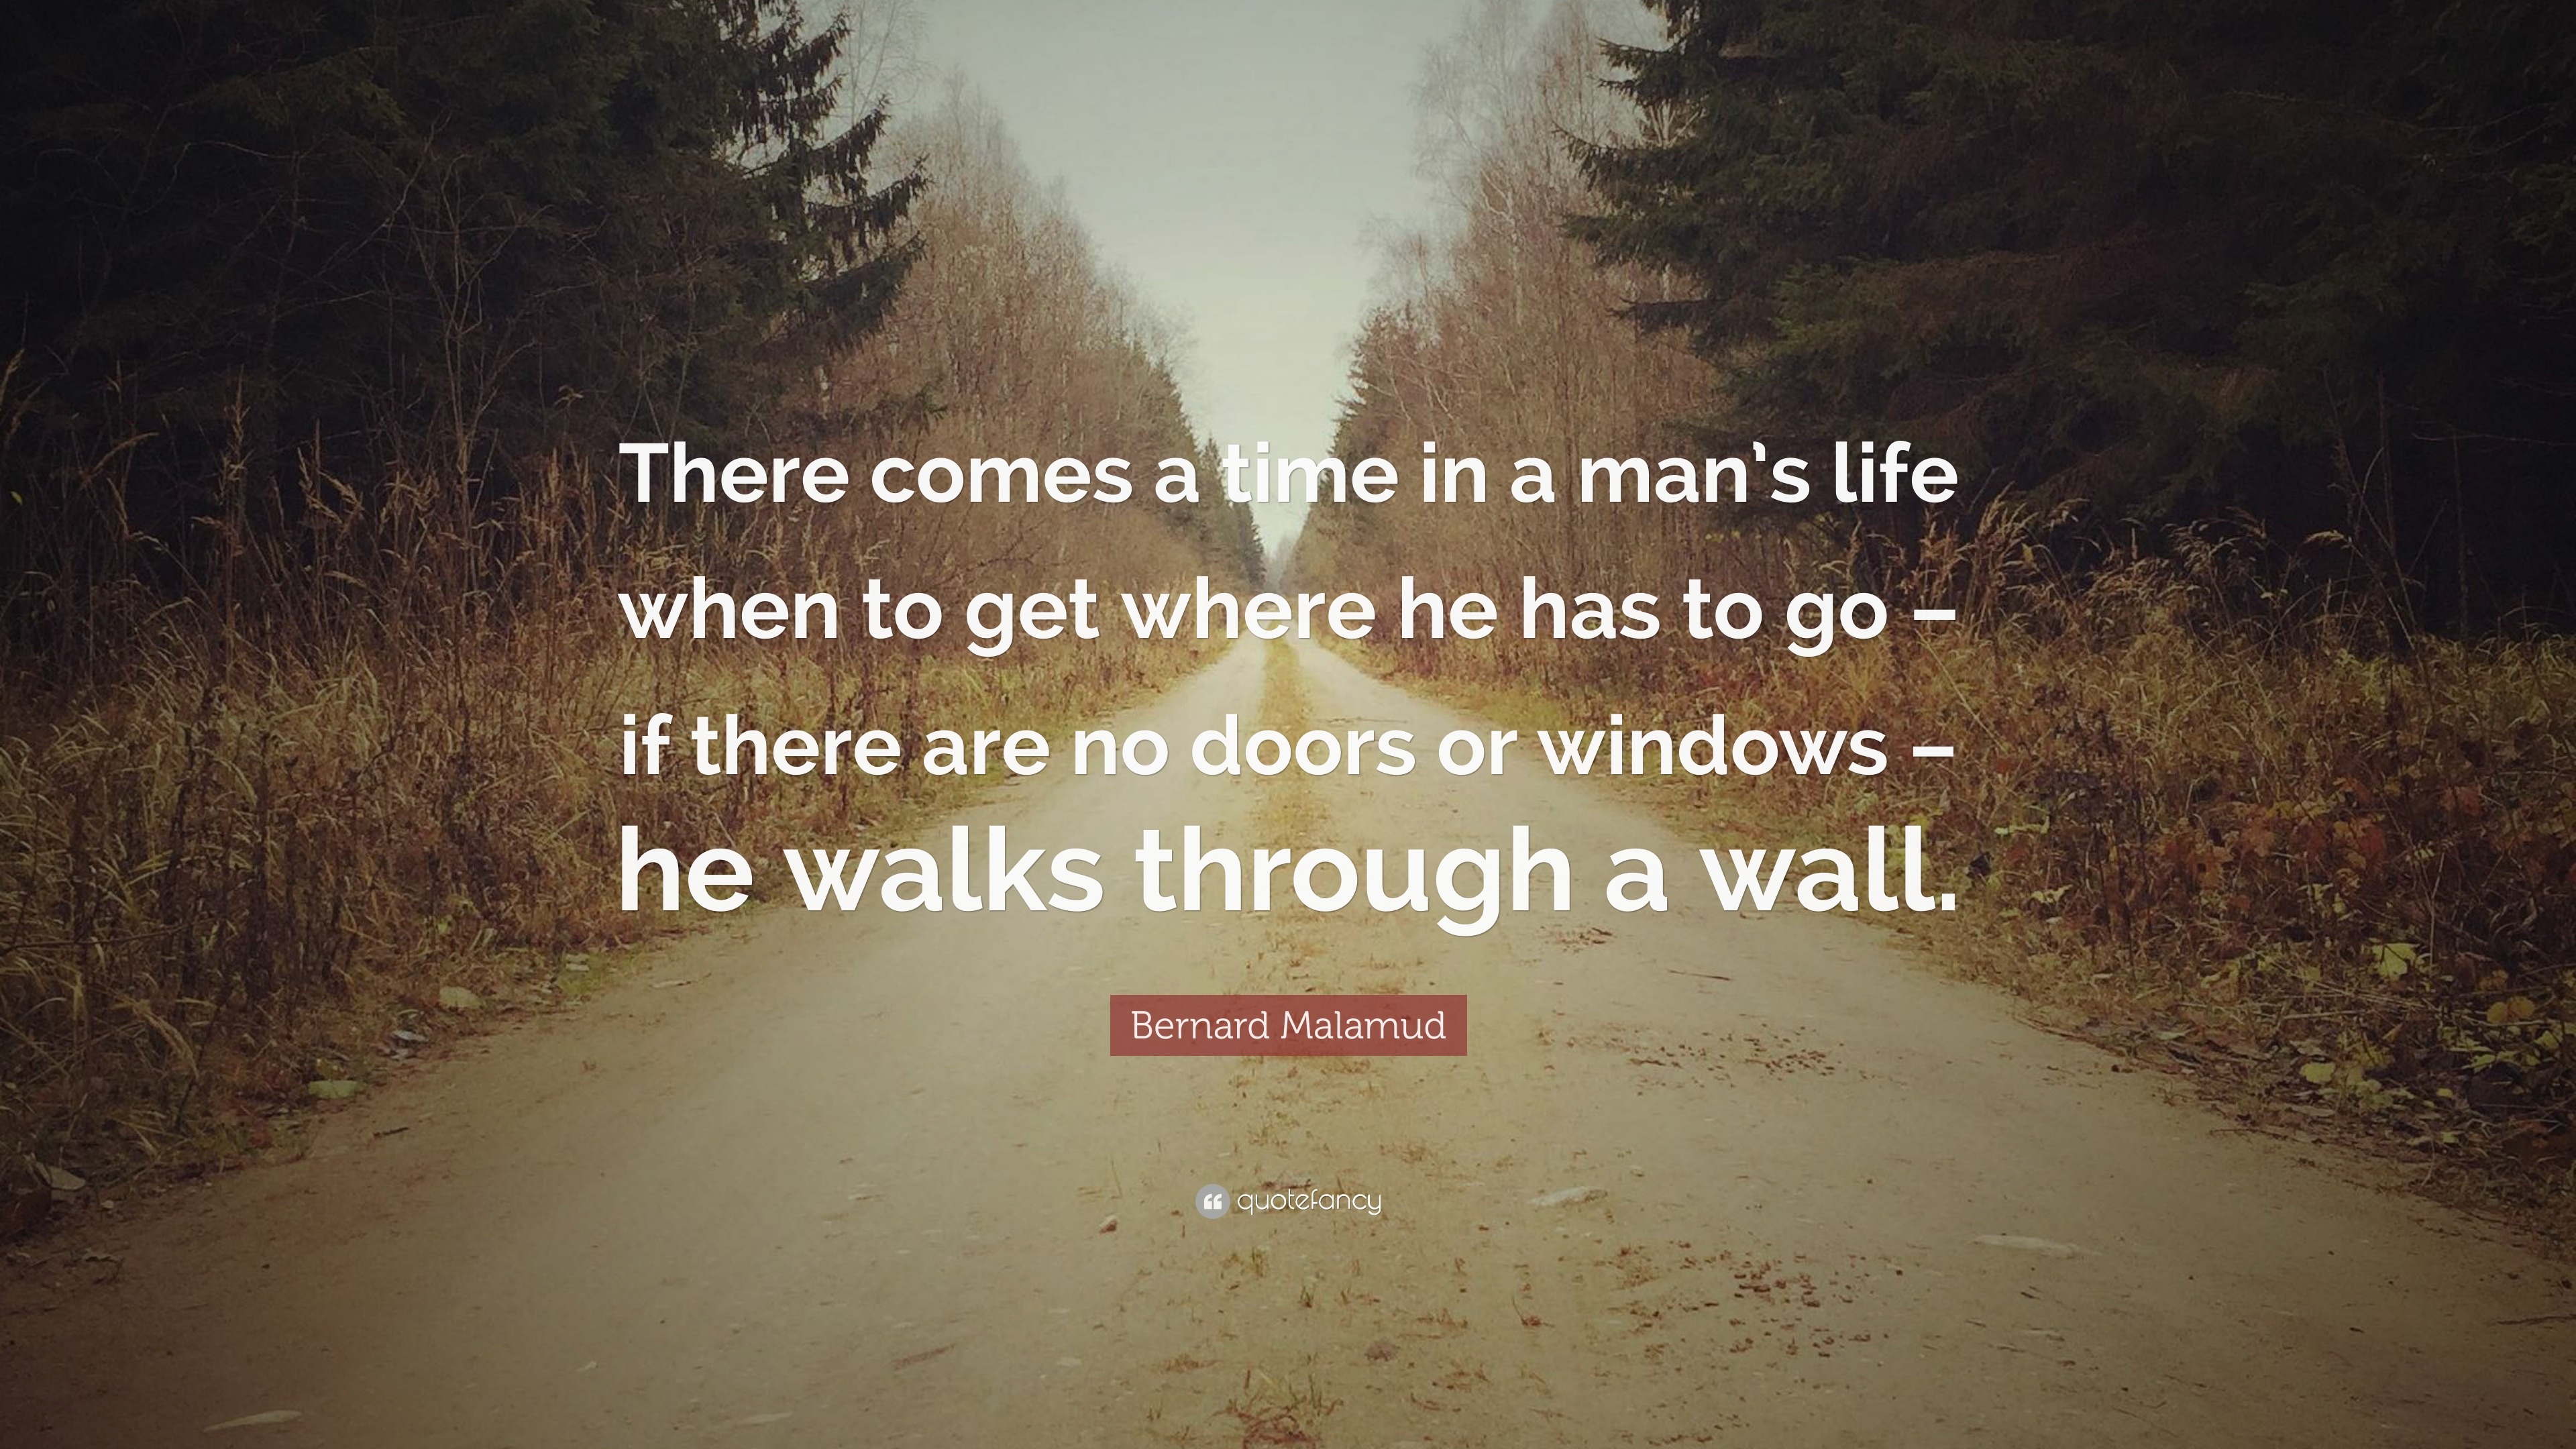 Bernard Malamud Quote “There es a time in a man s life when to